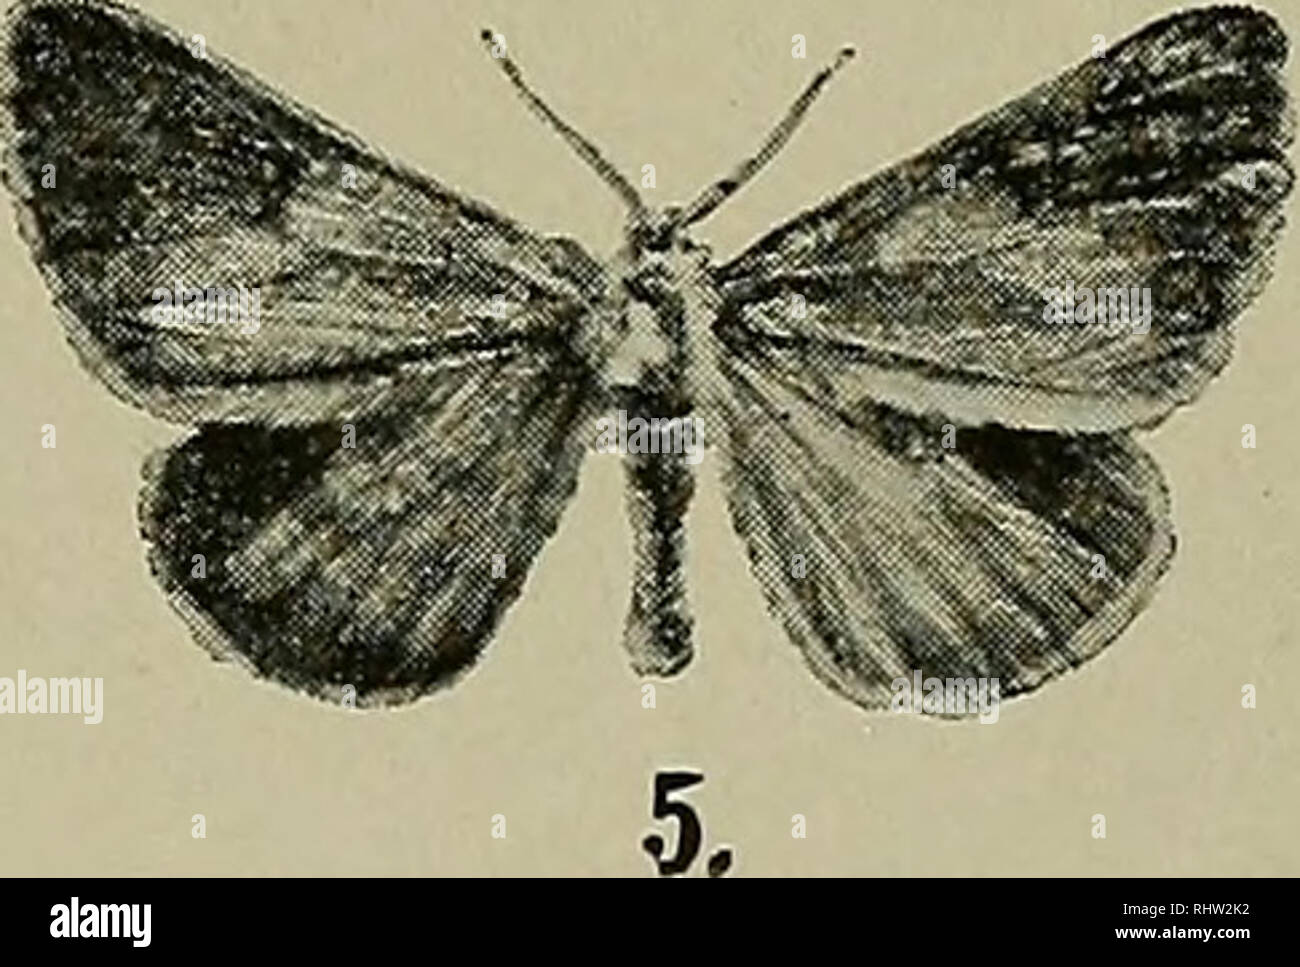 . Berliner entomologische Zeitschrift. Entomology; Insects. 3.. 6. 1. Abrax. marginata ab. mediofasciata Huene. 2. Abrax. marginata ab. staphyleata Huene. 3. Cheimat. brumata ab. hyemata Huene. 4. Boarmia cinctaria ab. pascuaria Huene. 5. Bupalus piniarius ab. anomalarius Huene. 6. Halia loricaria ab. cinerosaria Huene. 7. Cidaria bicolorata ab. guttata Huene. 8. Cidaria fluctuata ab, semifasciata Huene. 9. Cidaria montanata ab. lapponica Stgr. 10. Abrax. grossulariata ab. flavofasciata Huene.. Please note that these images are extracted from scanned page images that may have been digitally en Stock Photo